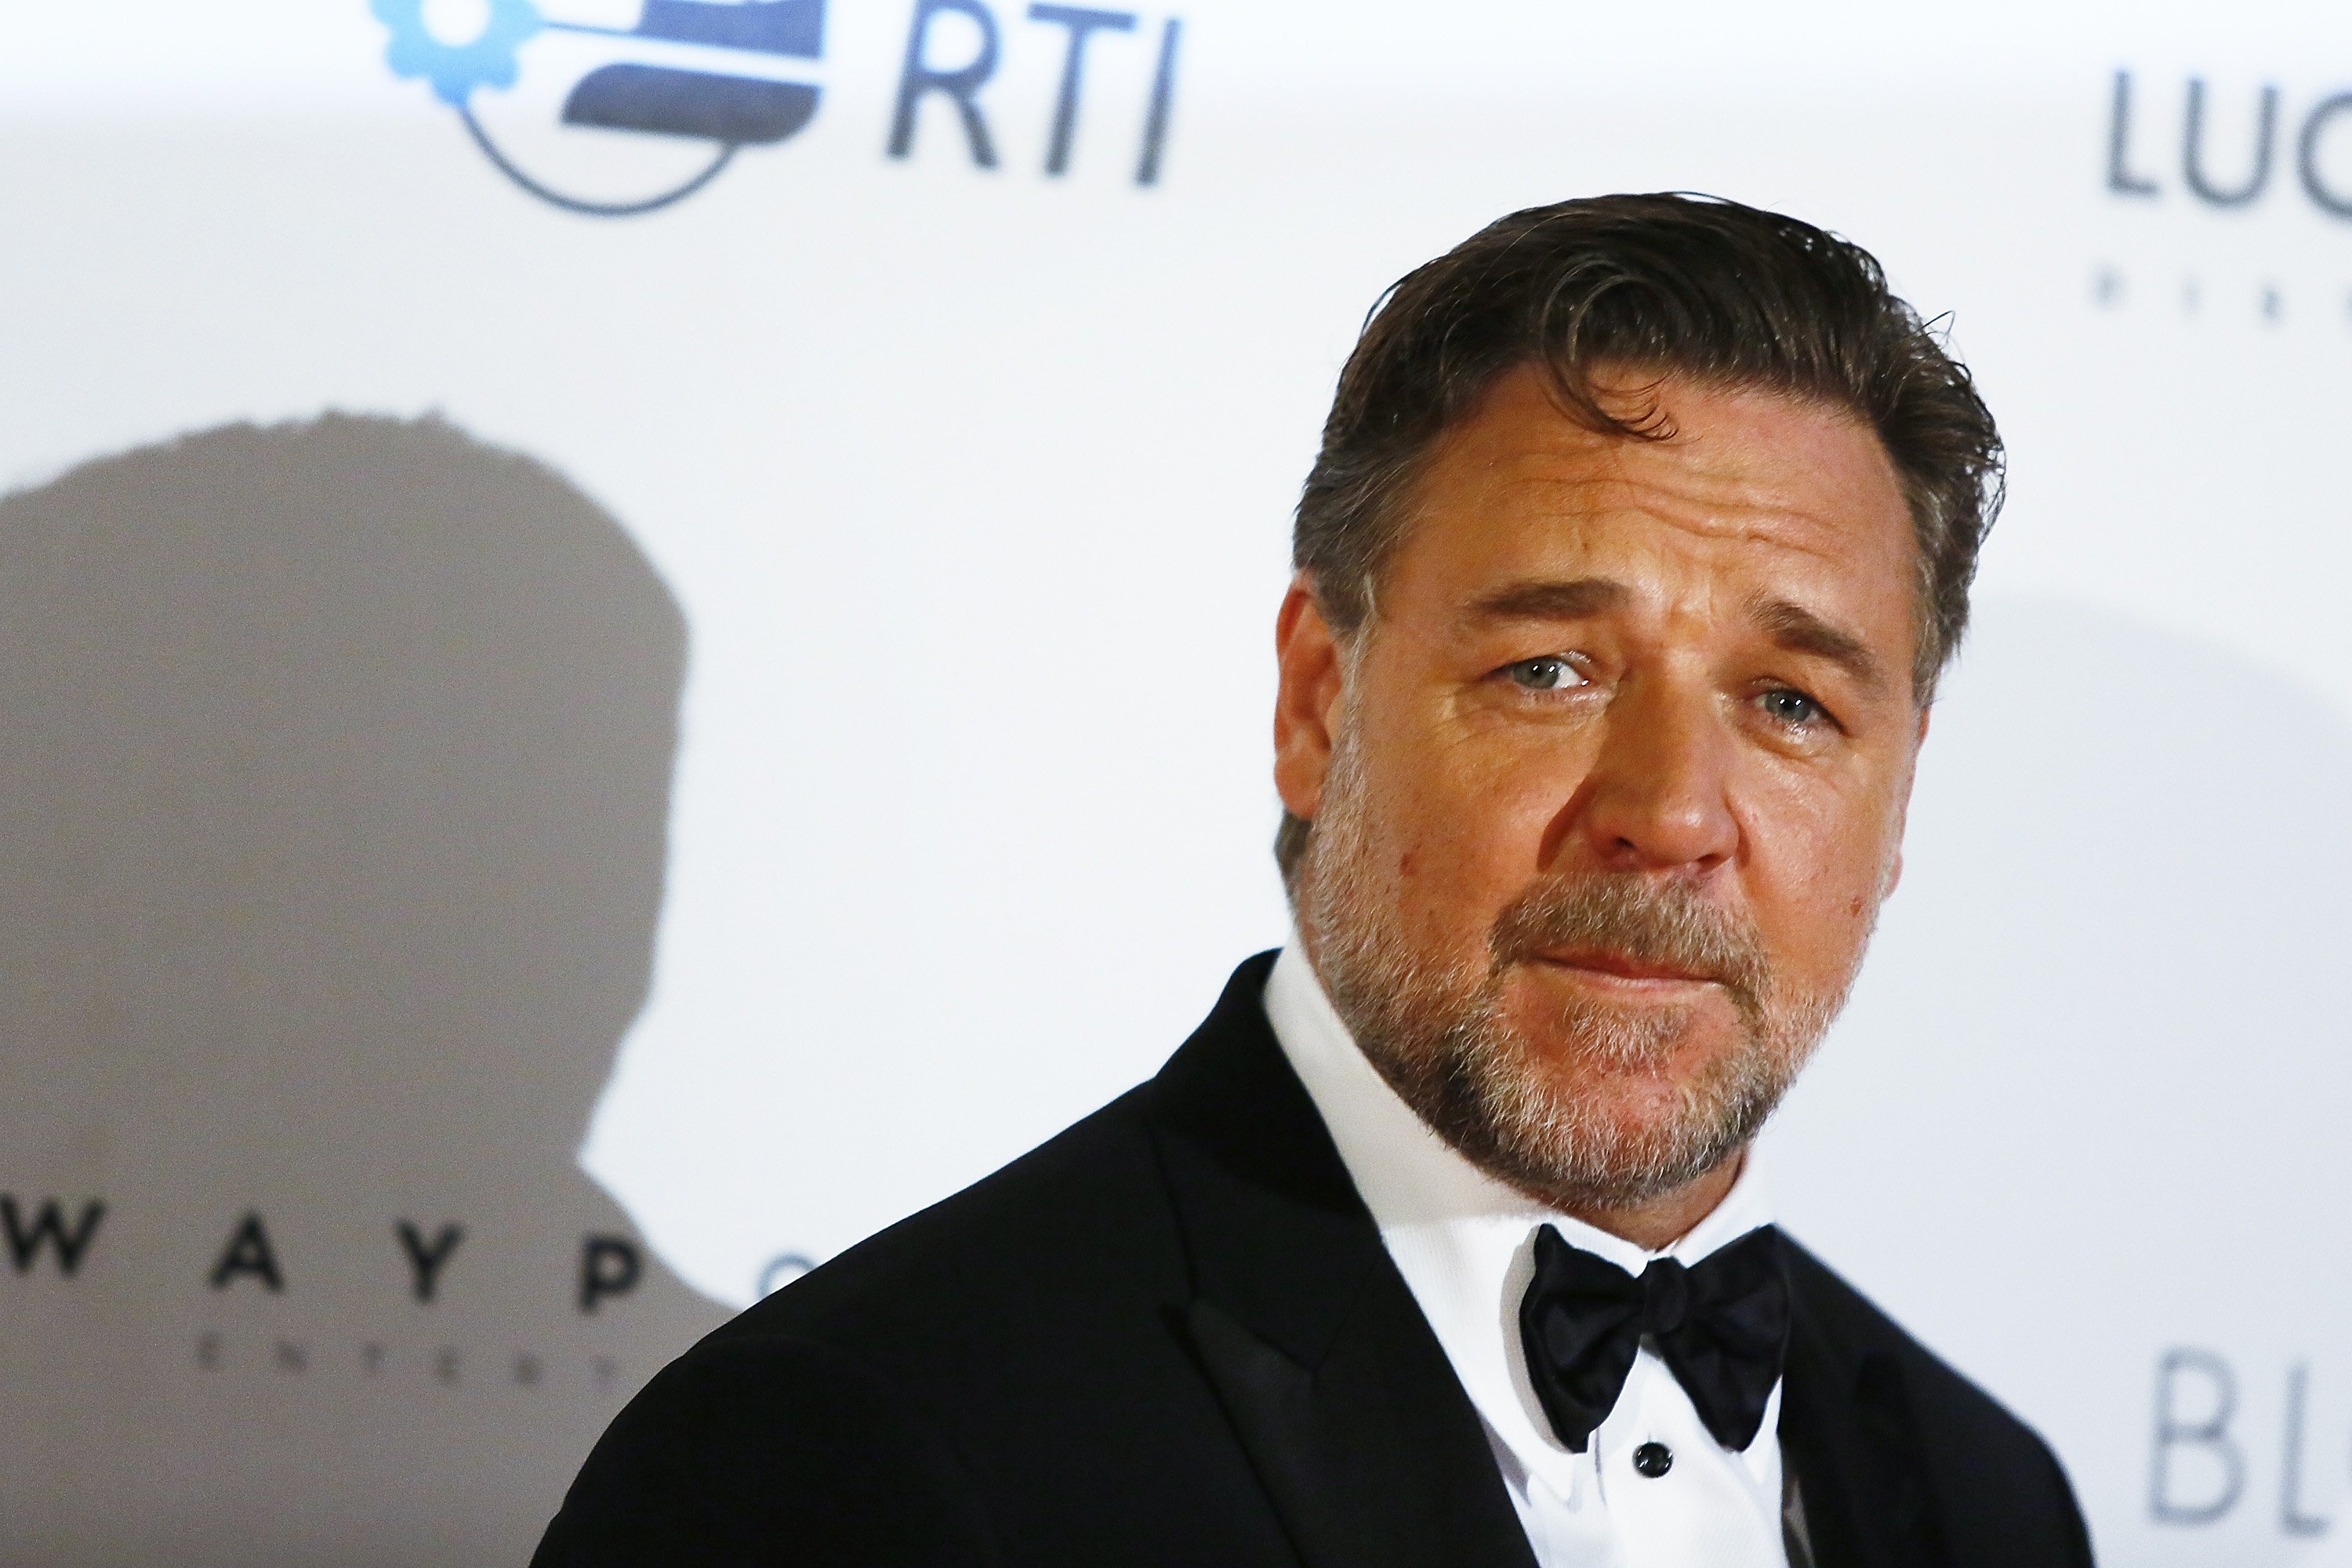 Russell Crowe during the 2016 premiere of "The Nice Guys" in Italy. | Photo: Getty Images